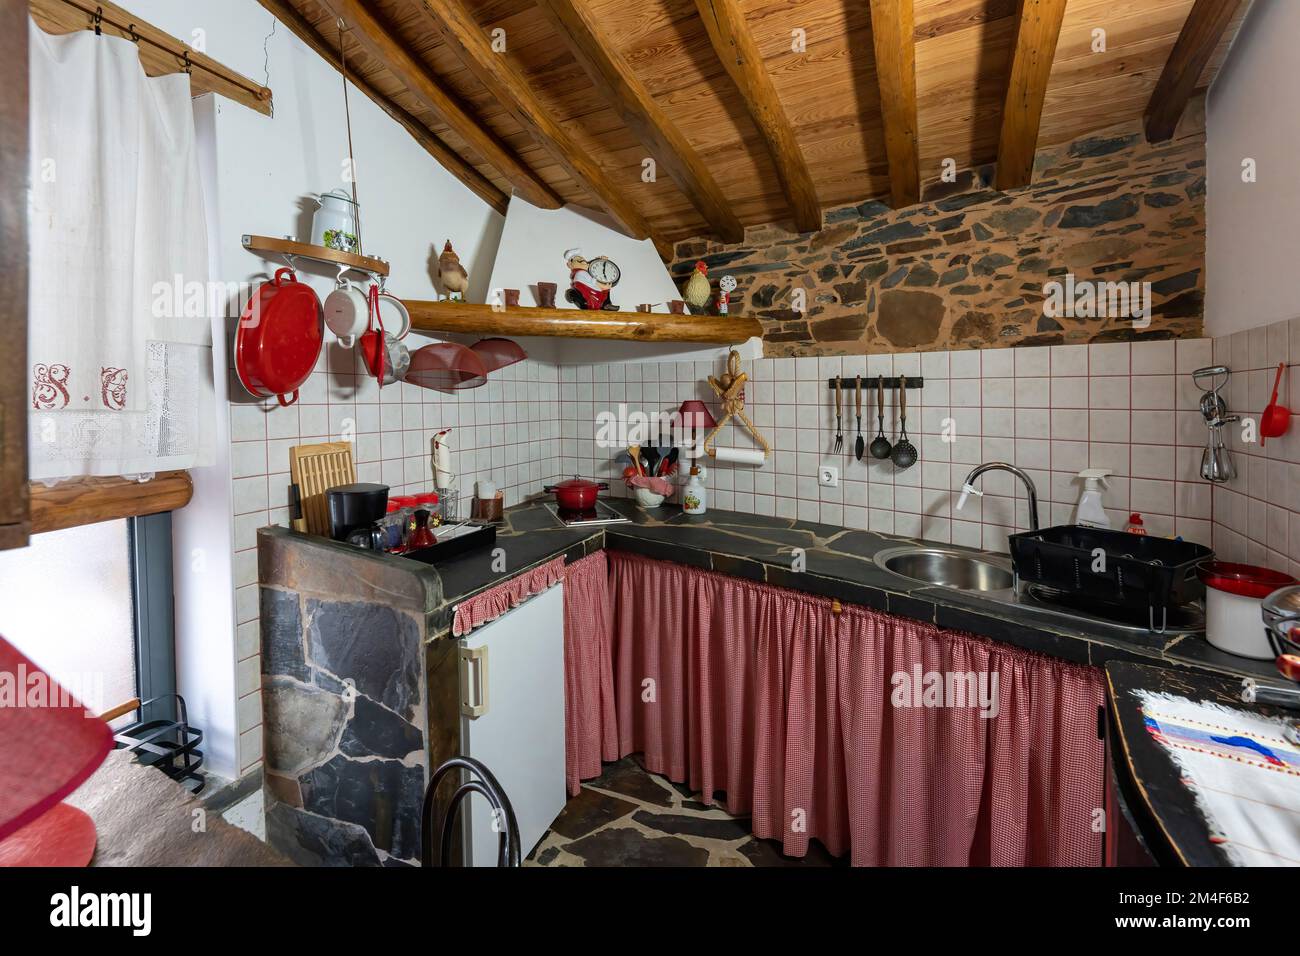 Small rustic old style kitchen Stock Photo